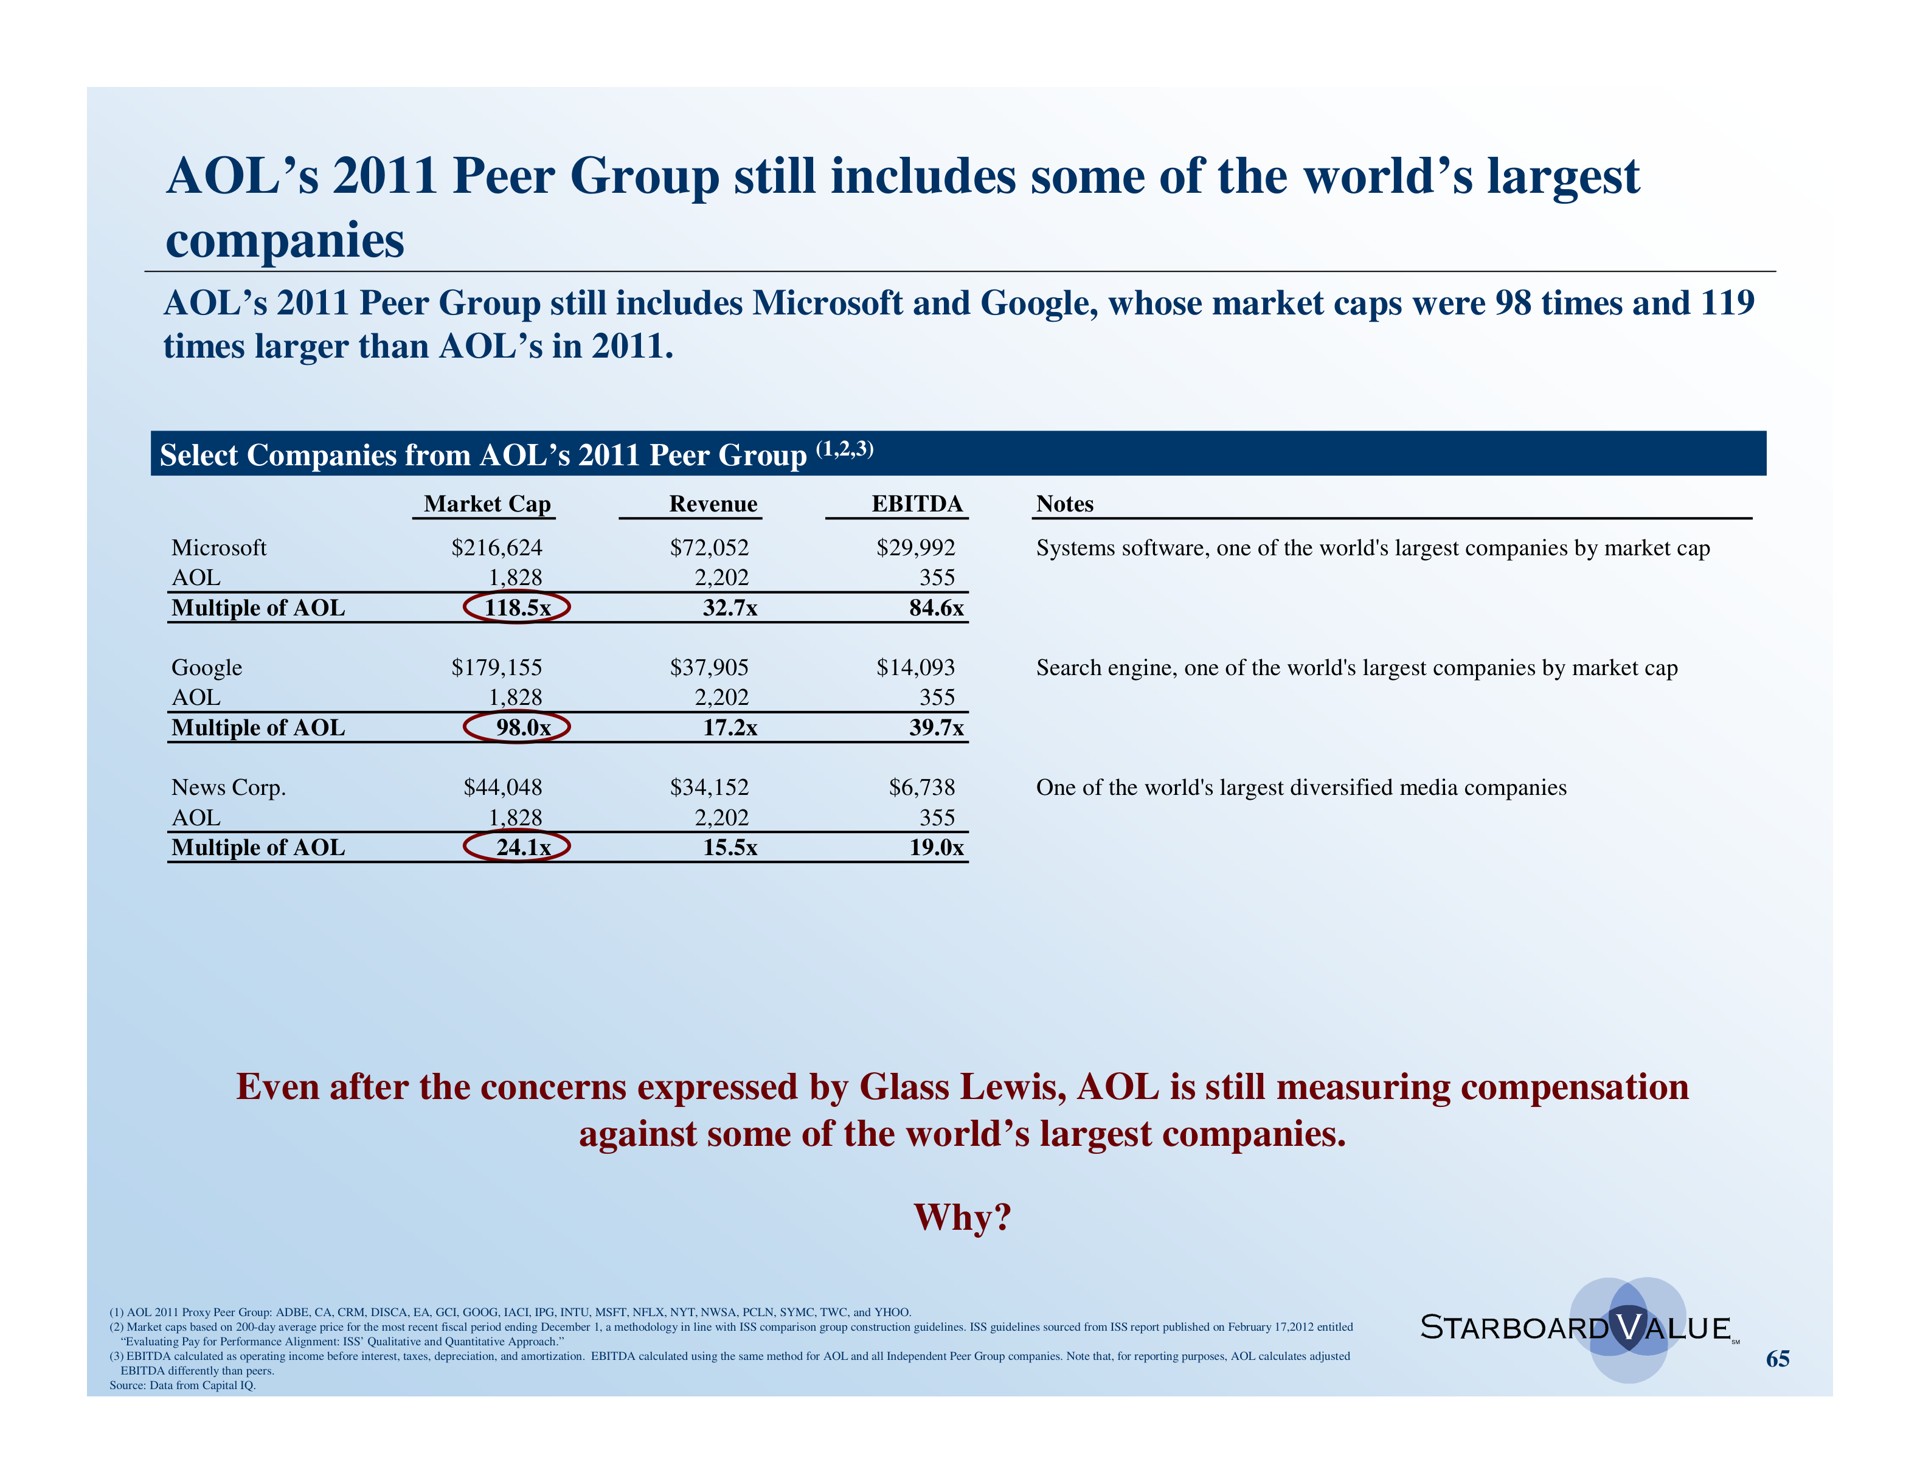 peer group still includes some of the world companies why | Starboard Value